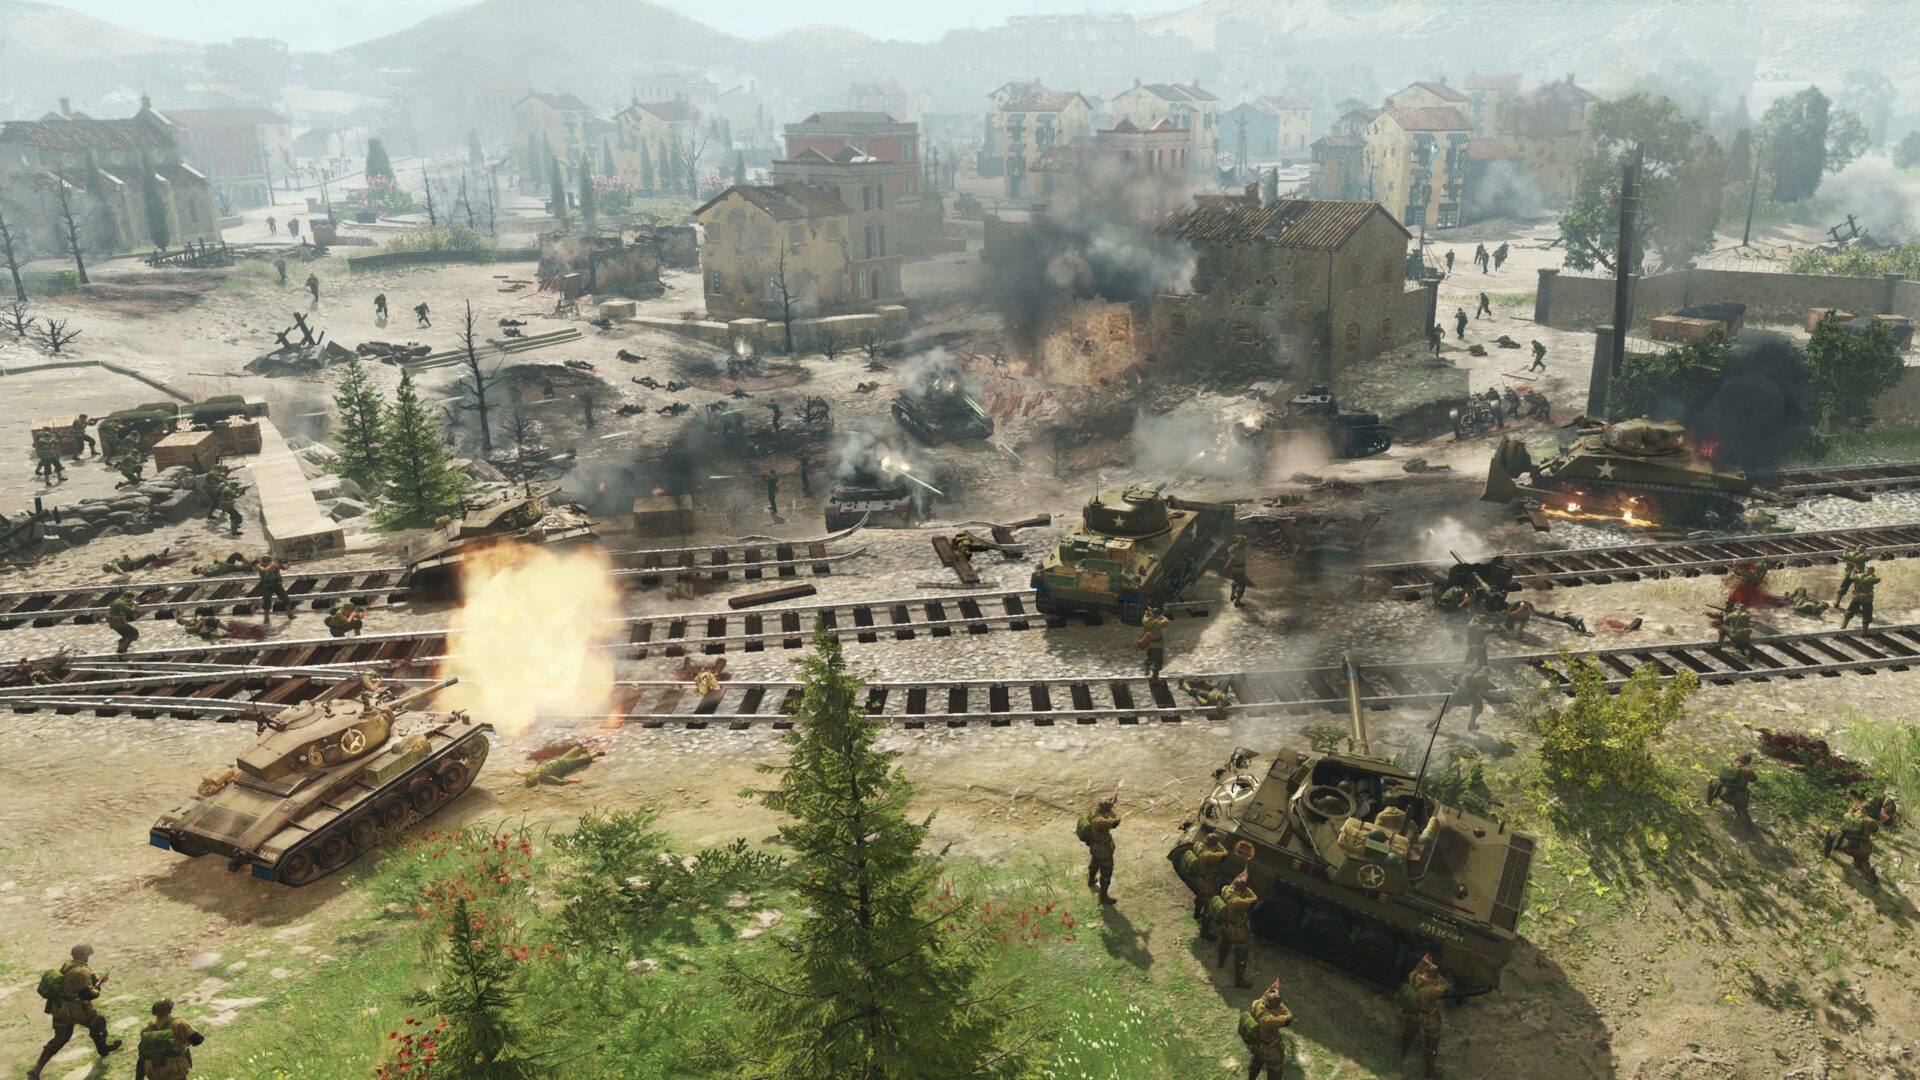 will company of heroes 3 be on xbox